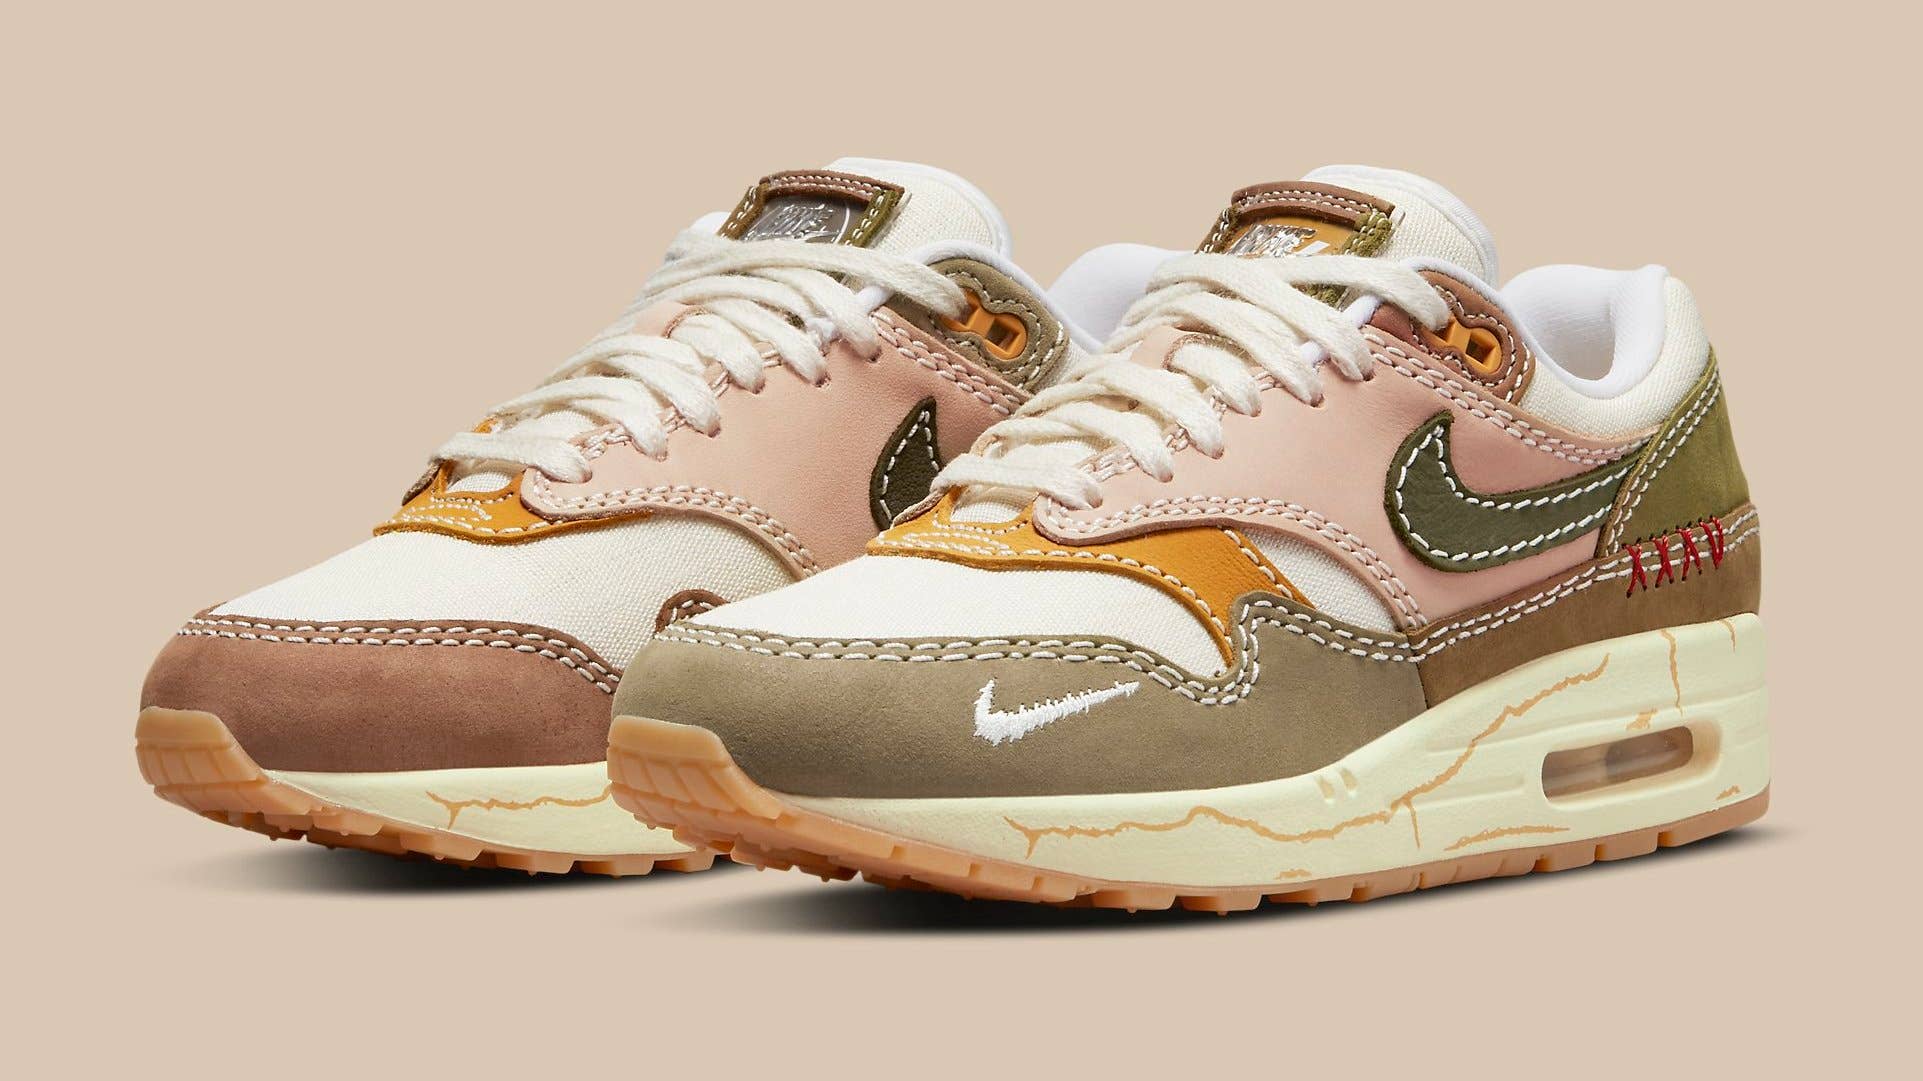 Valiente Touhou oportunidad Wabi-sabi' Nike Air Max 1 Releasing Exclusively in Asia-Pacific and Latin  America | Complex